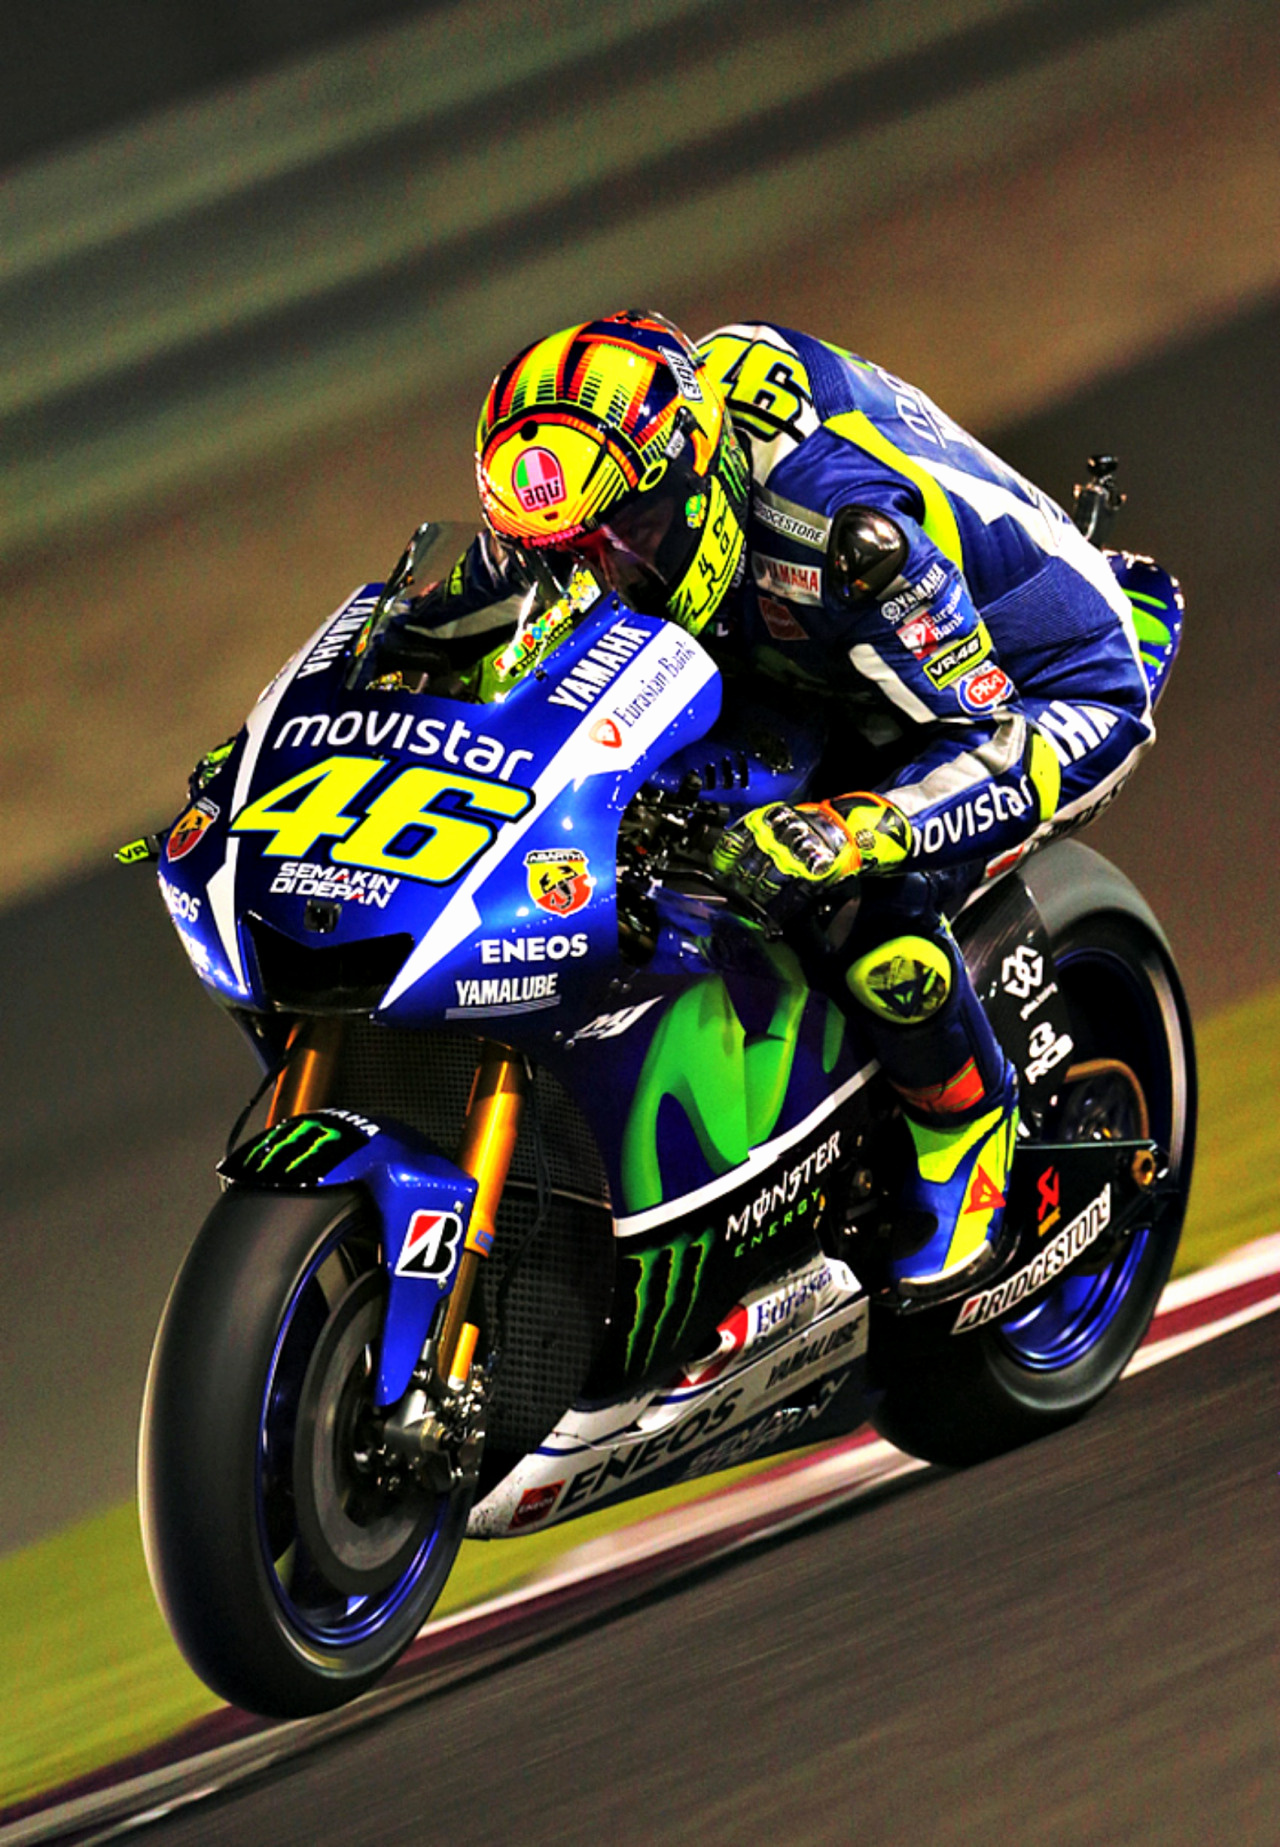 Valentino Rossi Wallpaper Cell Phone - Hd Wallpaper Valentino Rossi - HD Wallpaper 